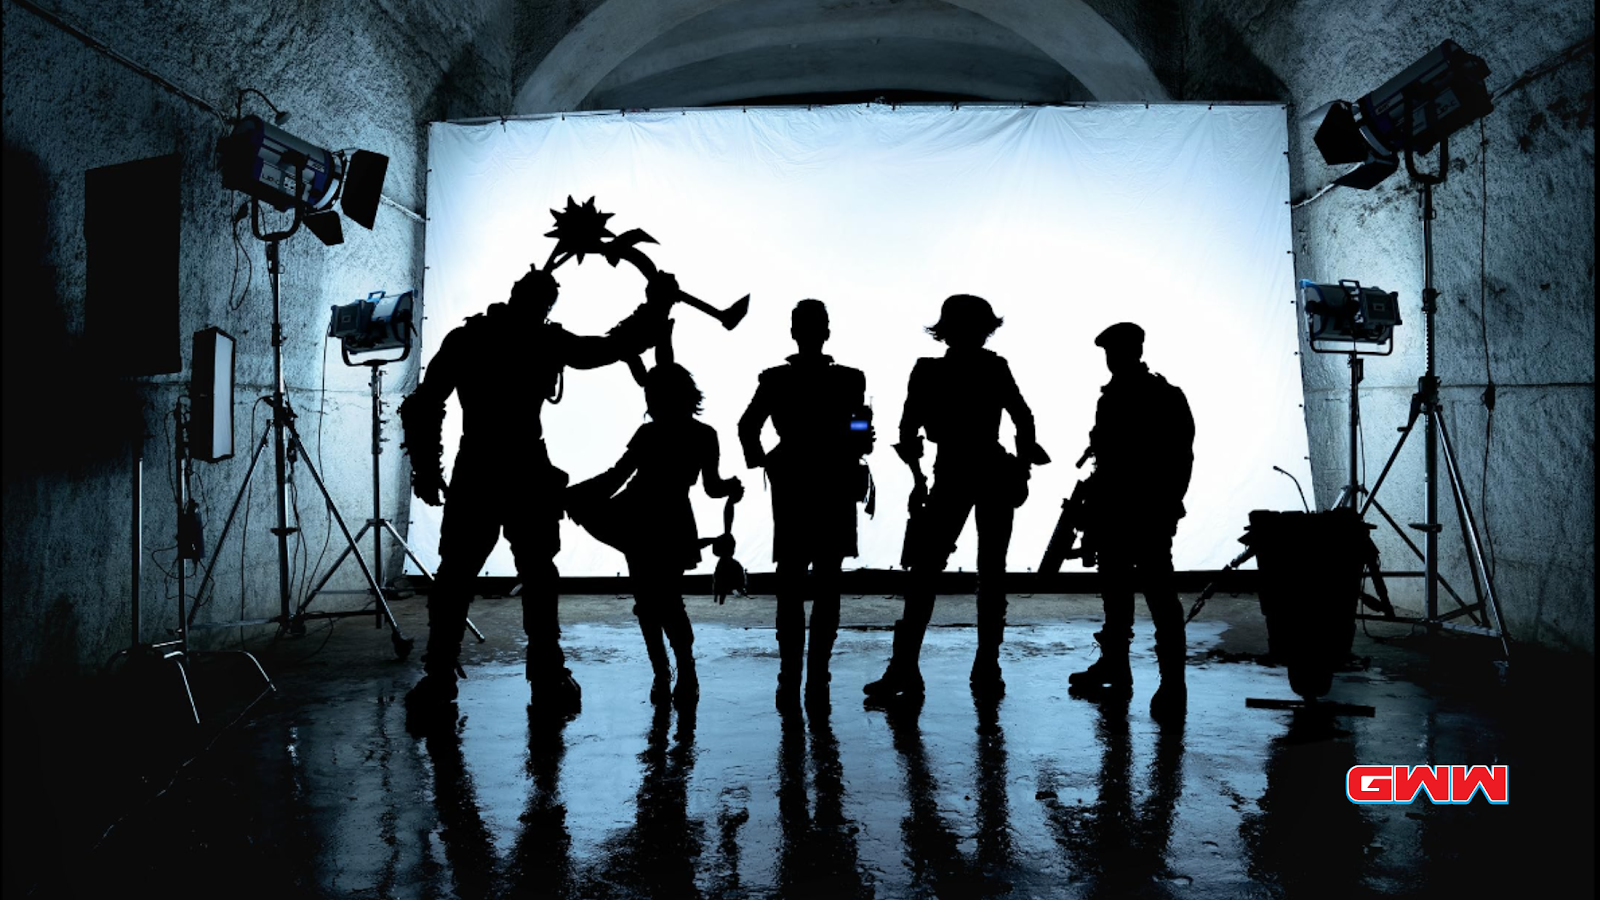 Silhouettes of main cast of Borderlands, Borderlands movie release date 